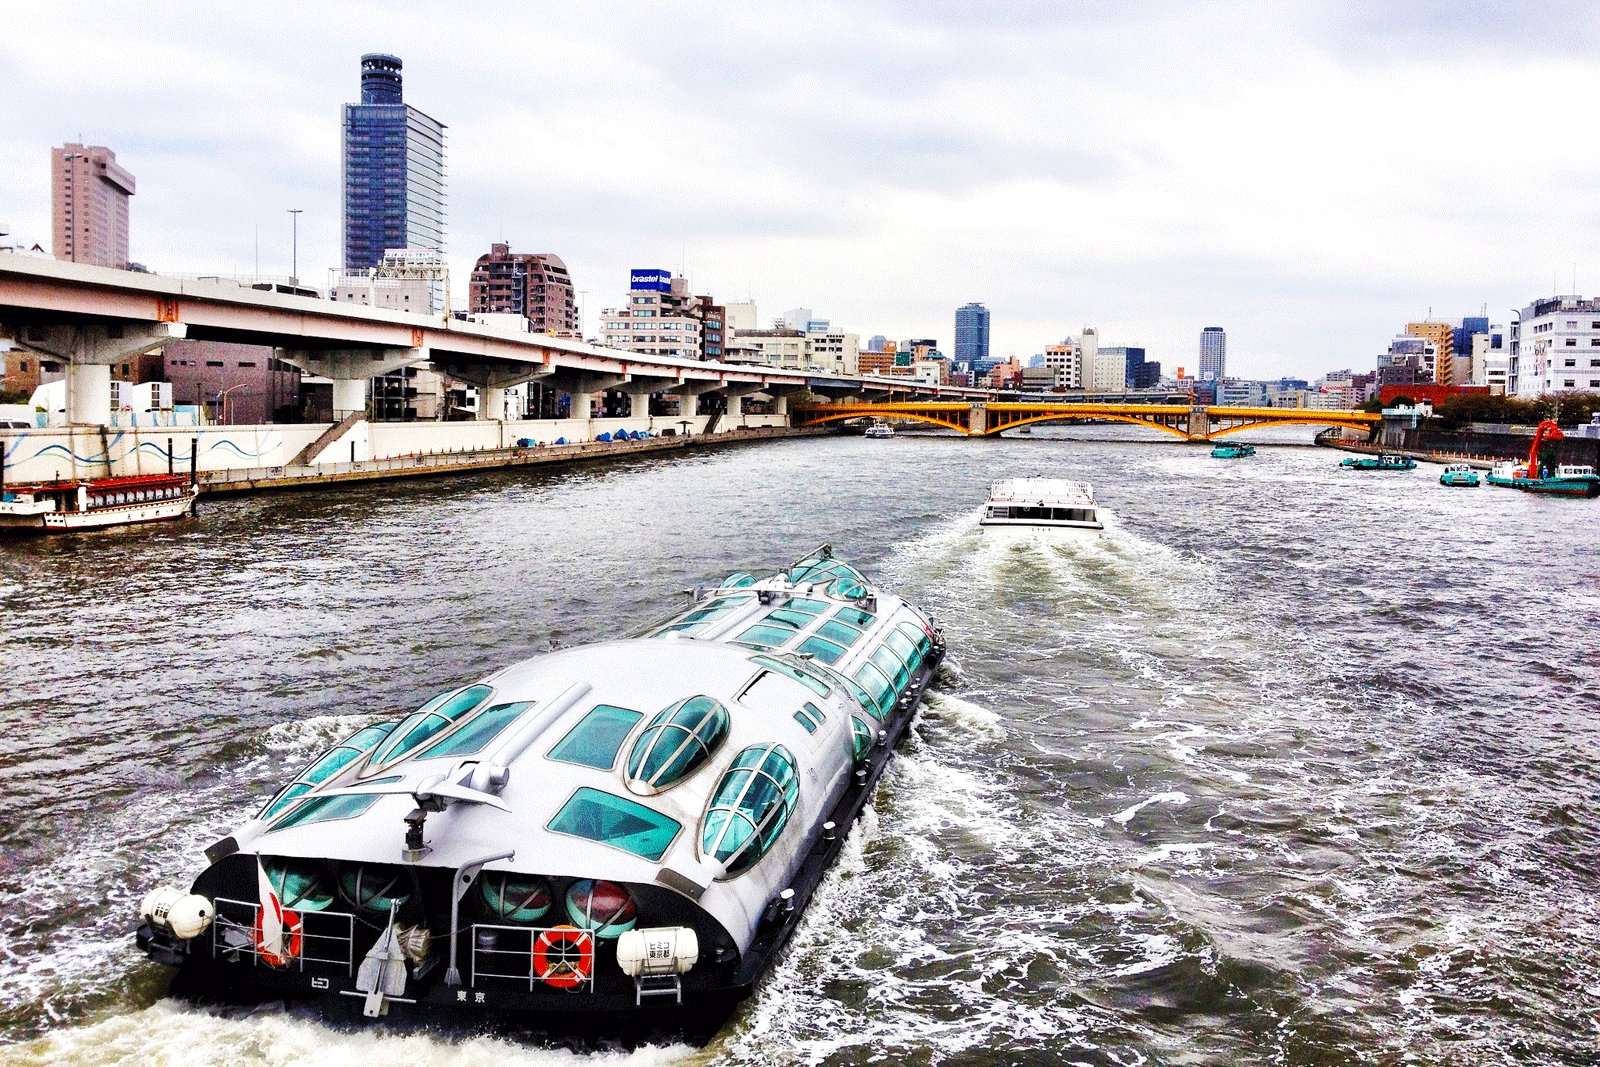 How to take a hotaluna water bus ride in Tokyo